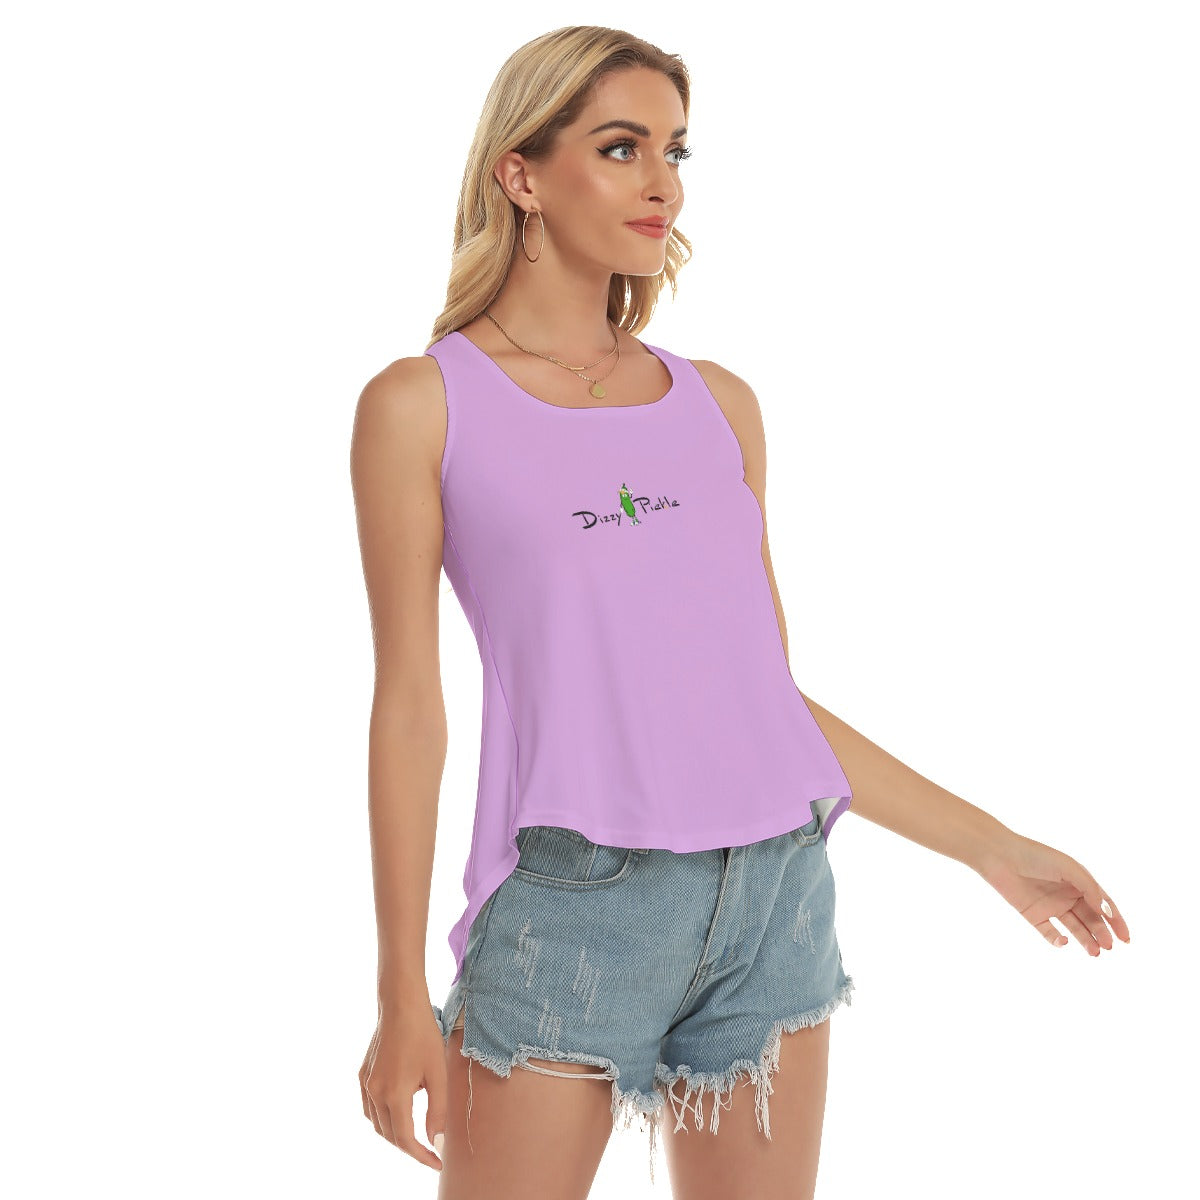 DZY P Classic - Lavender - Pickleball Open-Backed Tank Top by Dizzy Pickle